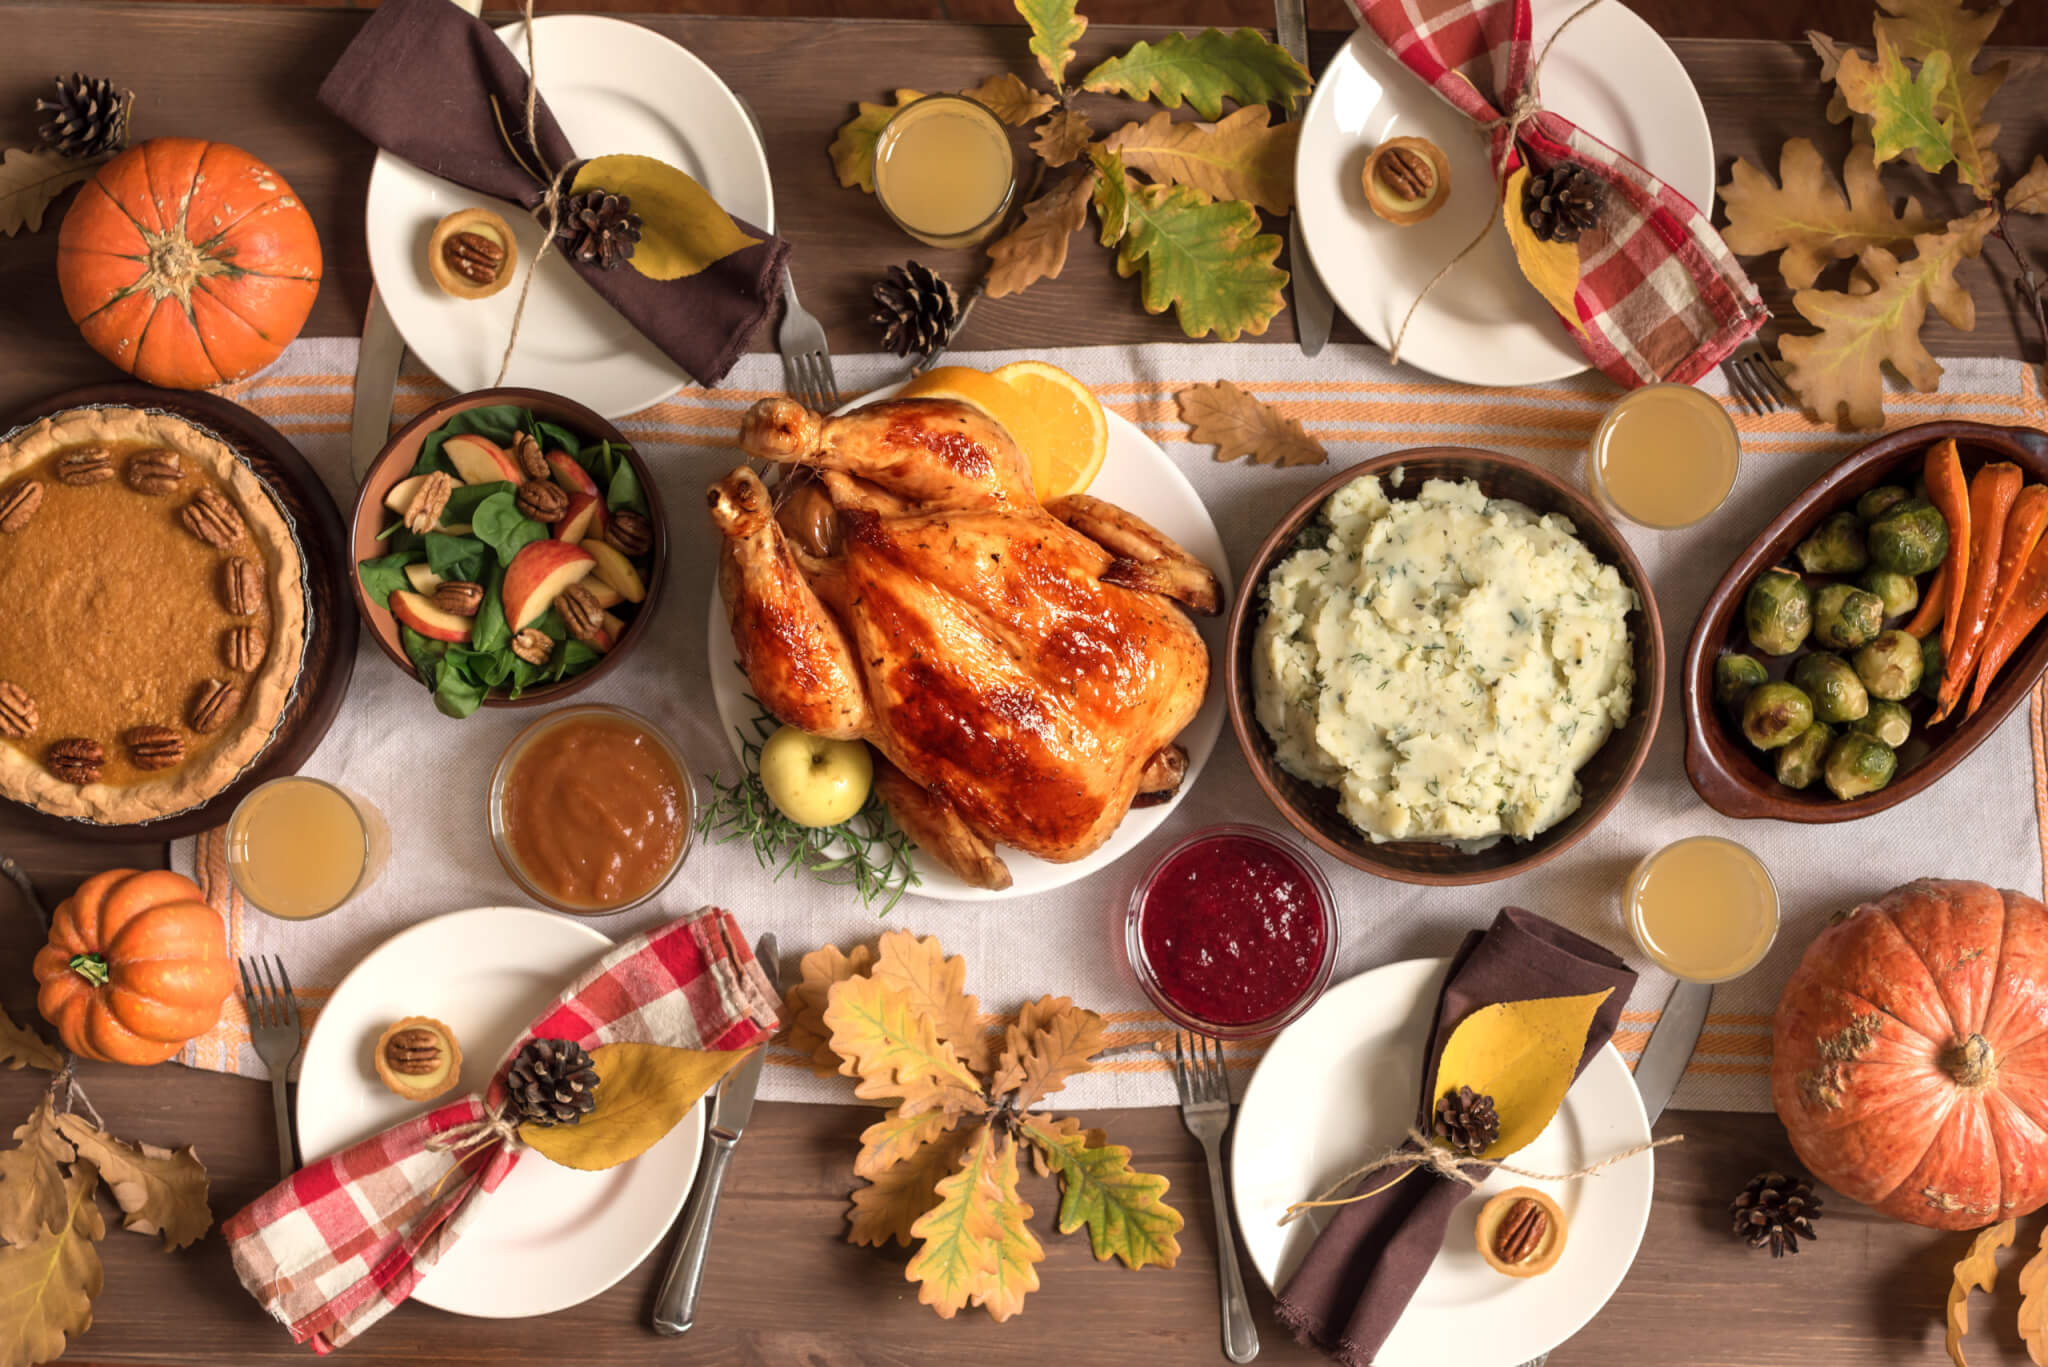 Thanksgiving Turkey Dinner with All the Side dishes photo by mizina - stock.adobe.com on Unsplash